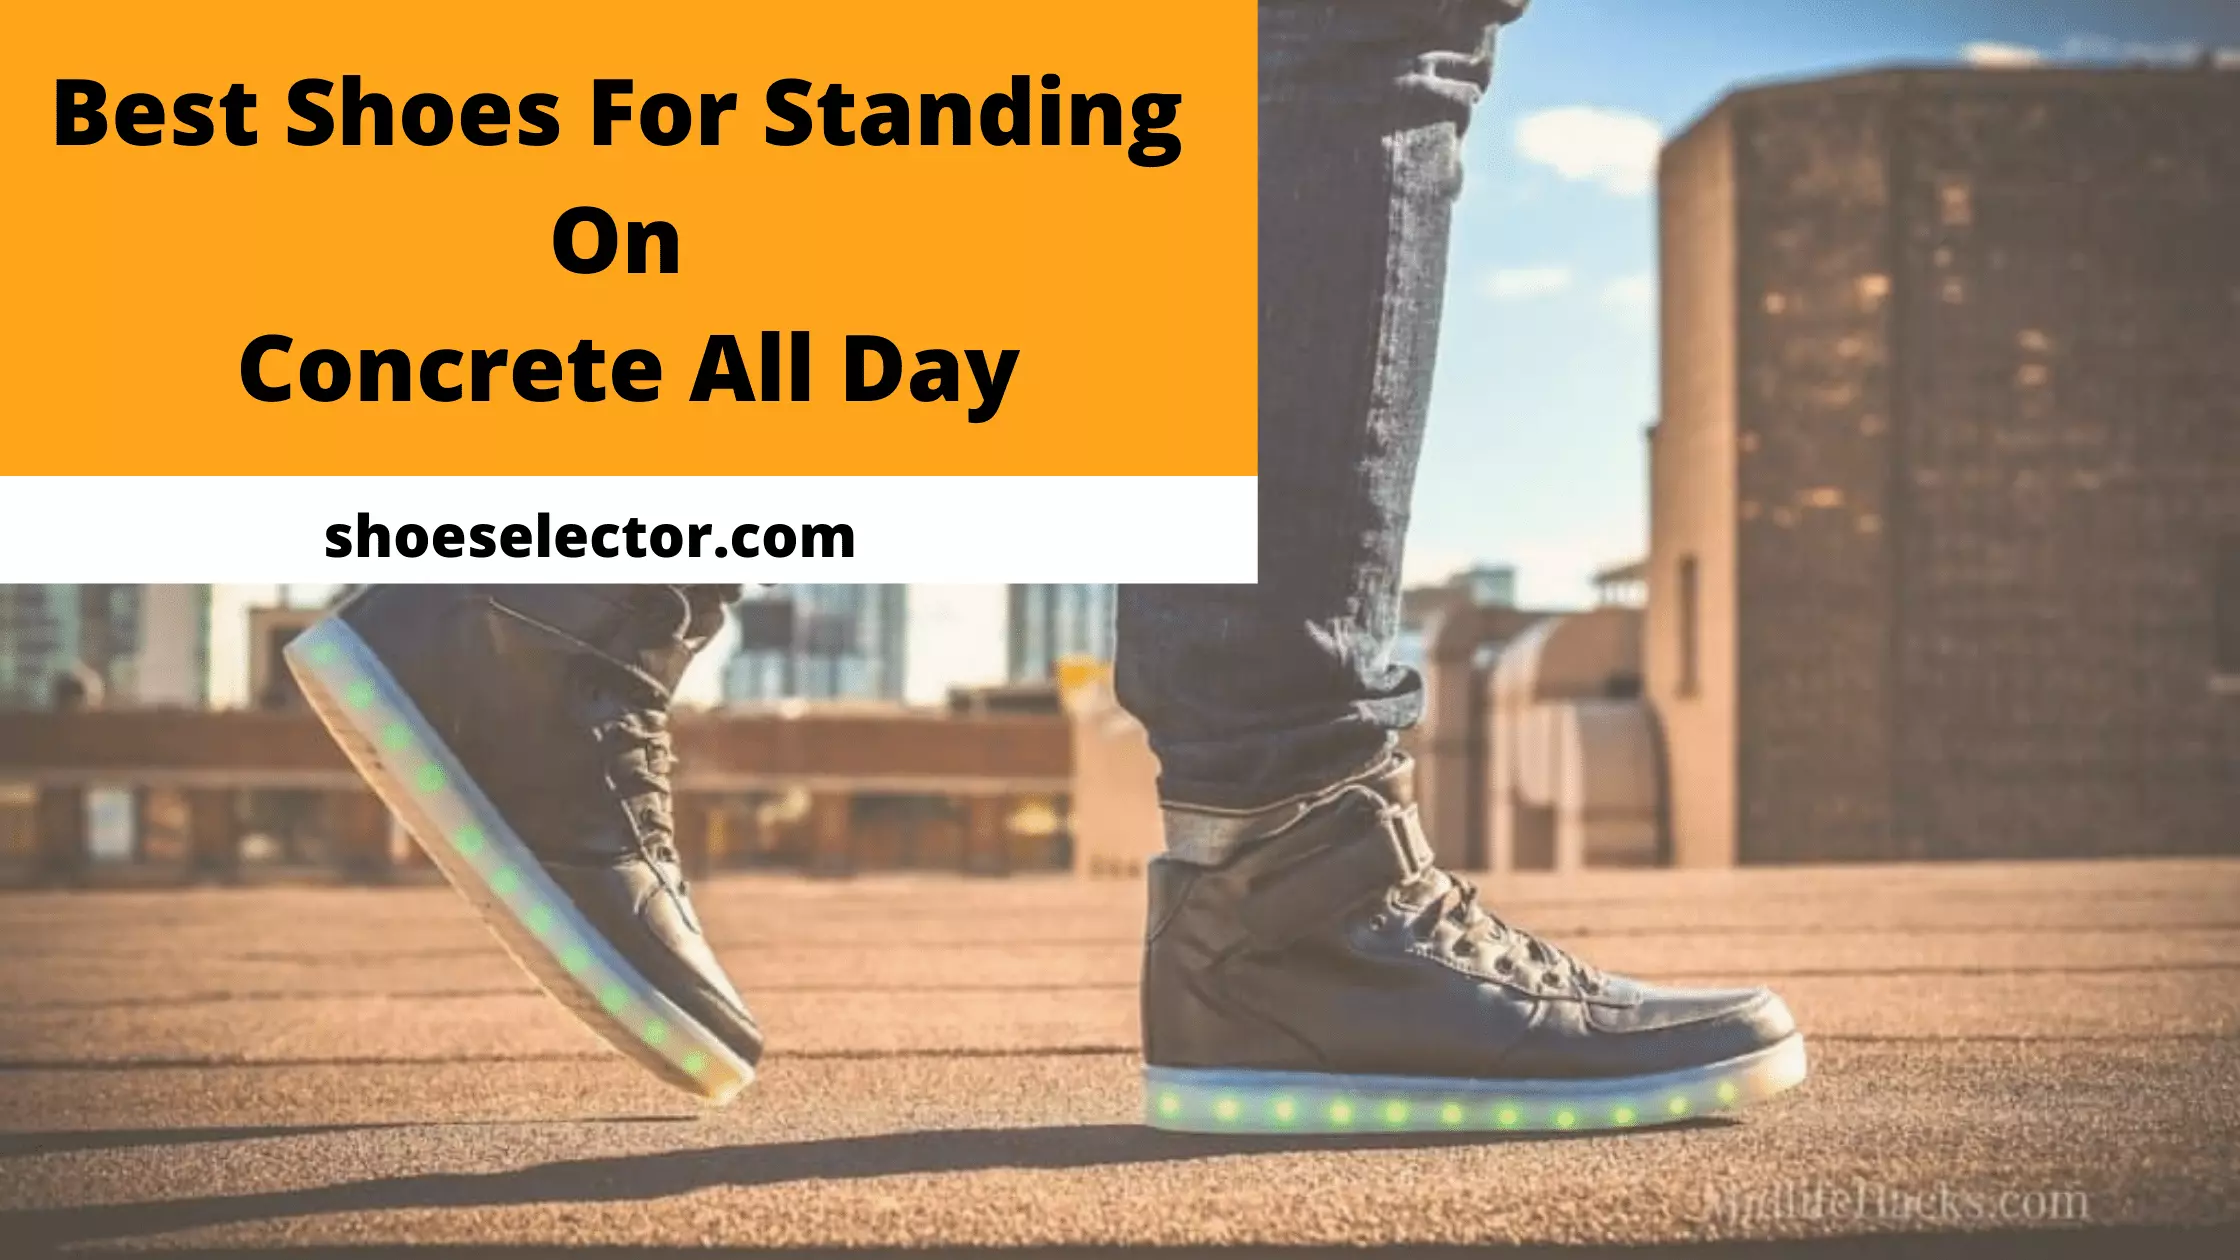 Best Shoes For Standing on Concrete All Day | Complete Details